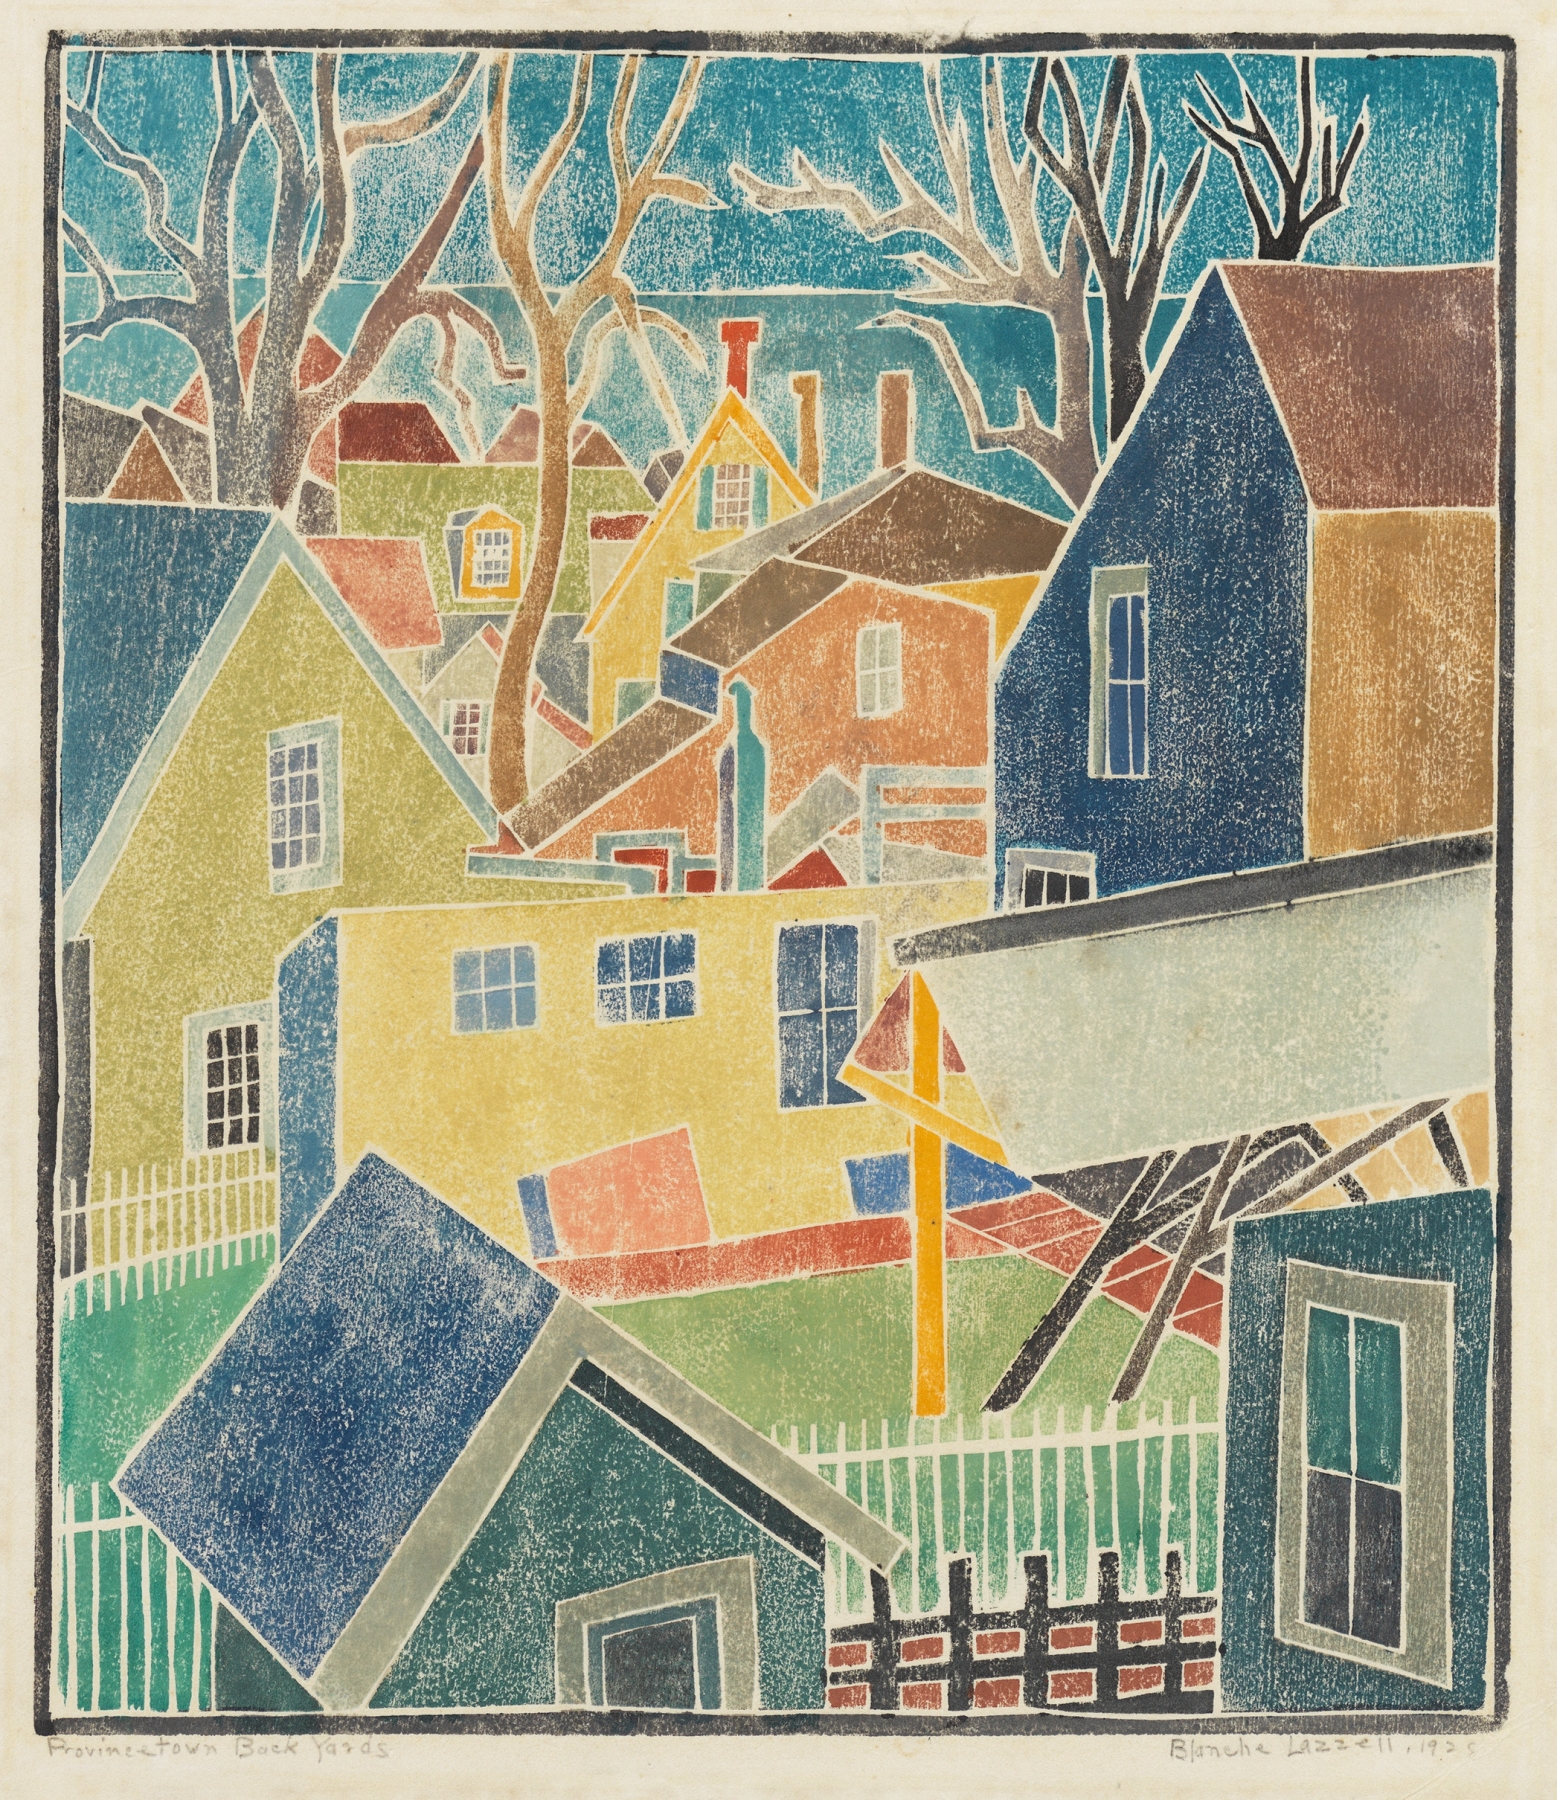 Provincetown Back Yards, 1927
White-line color woodcut
13 15/16 x 12 1/16 inches